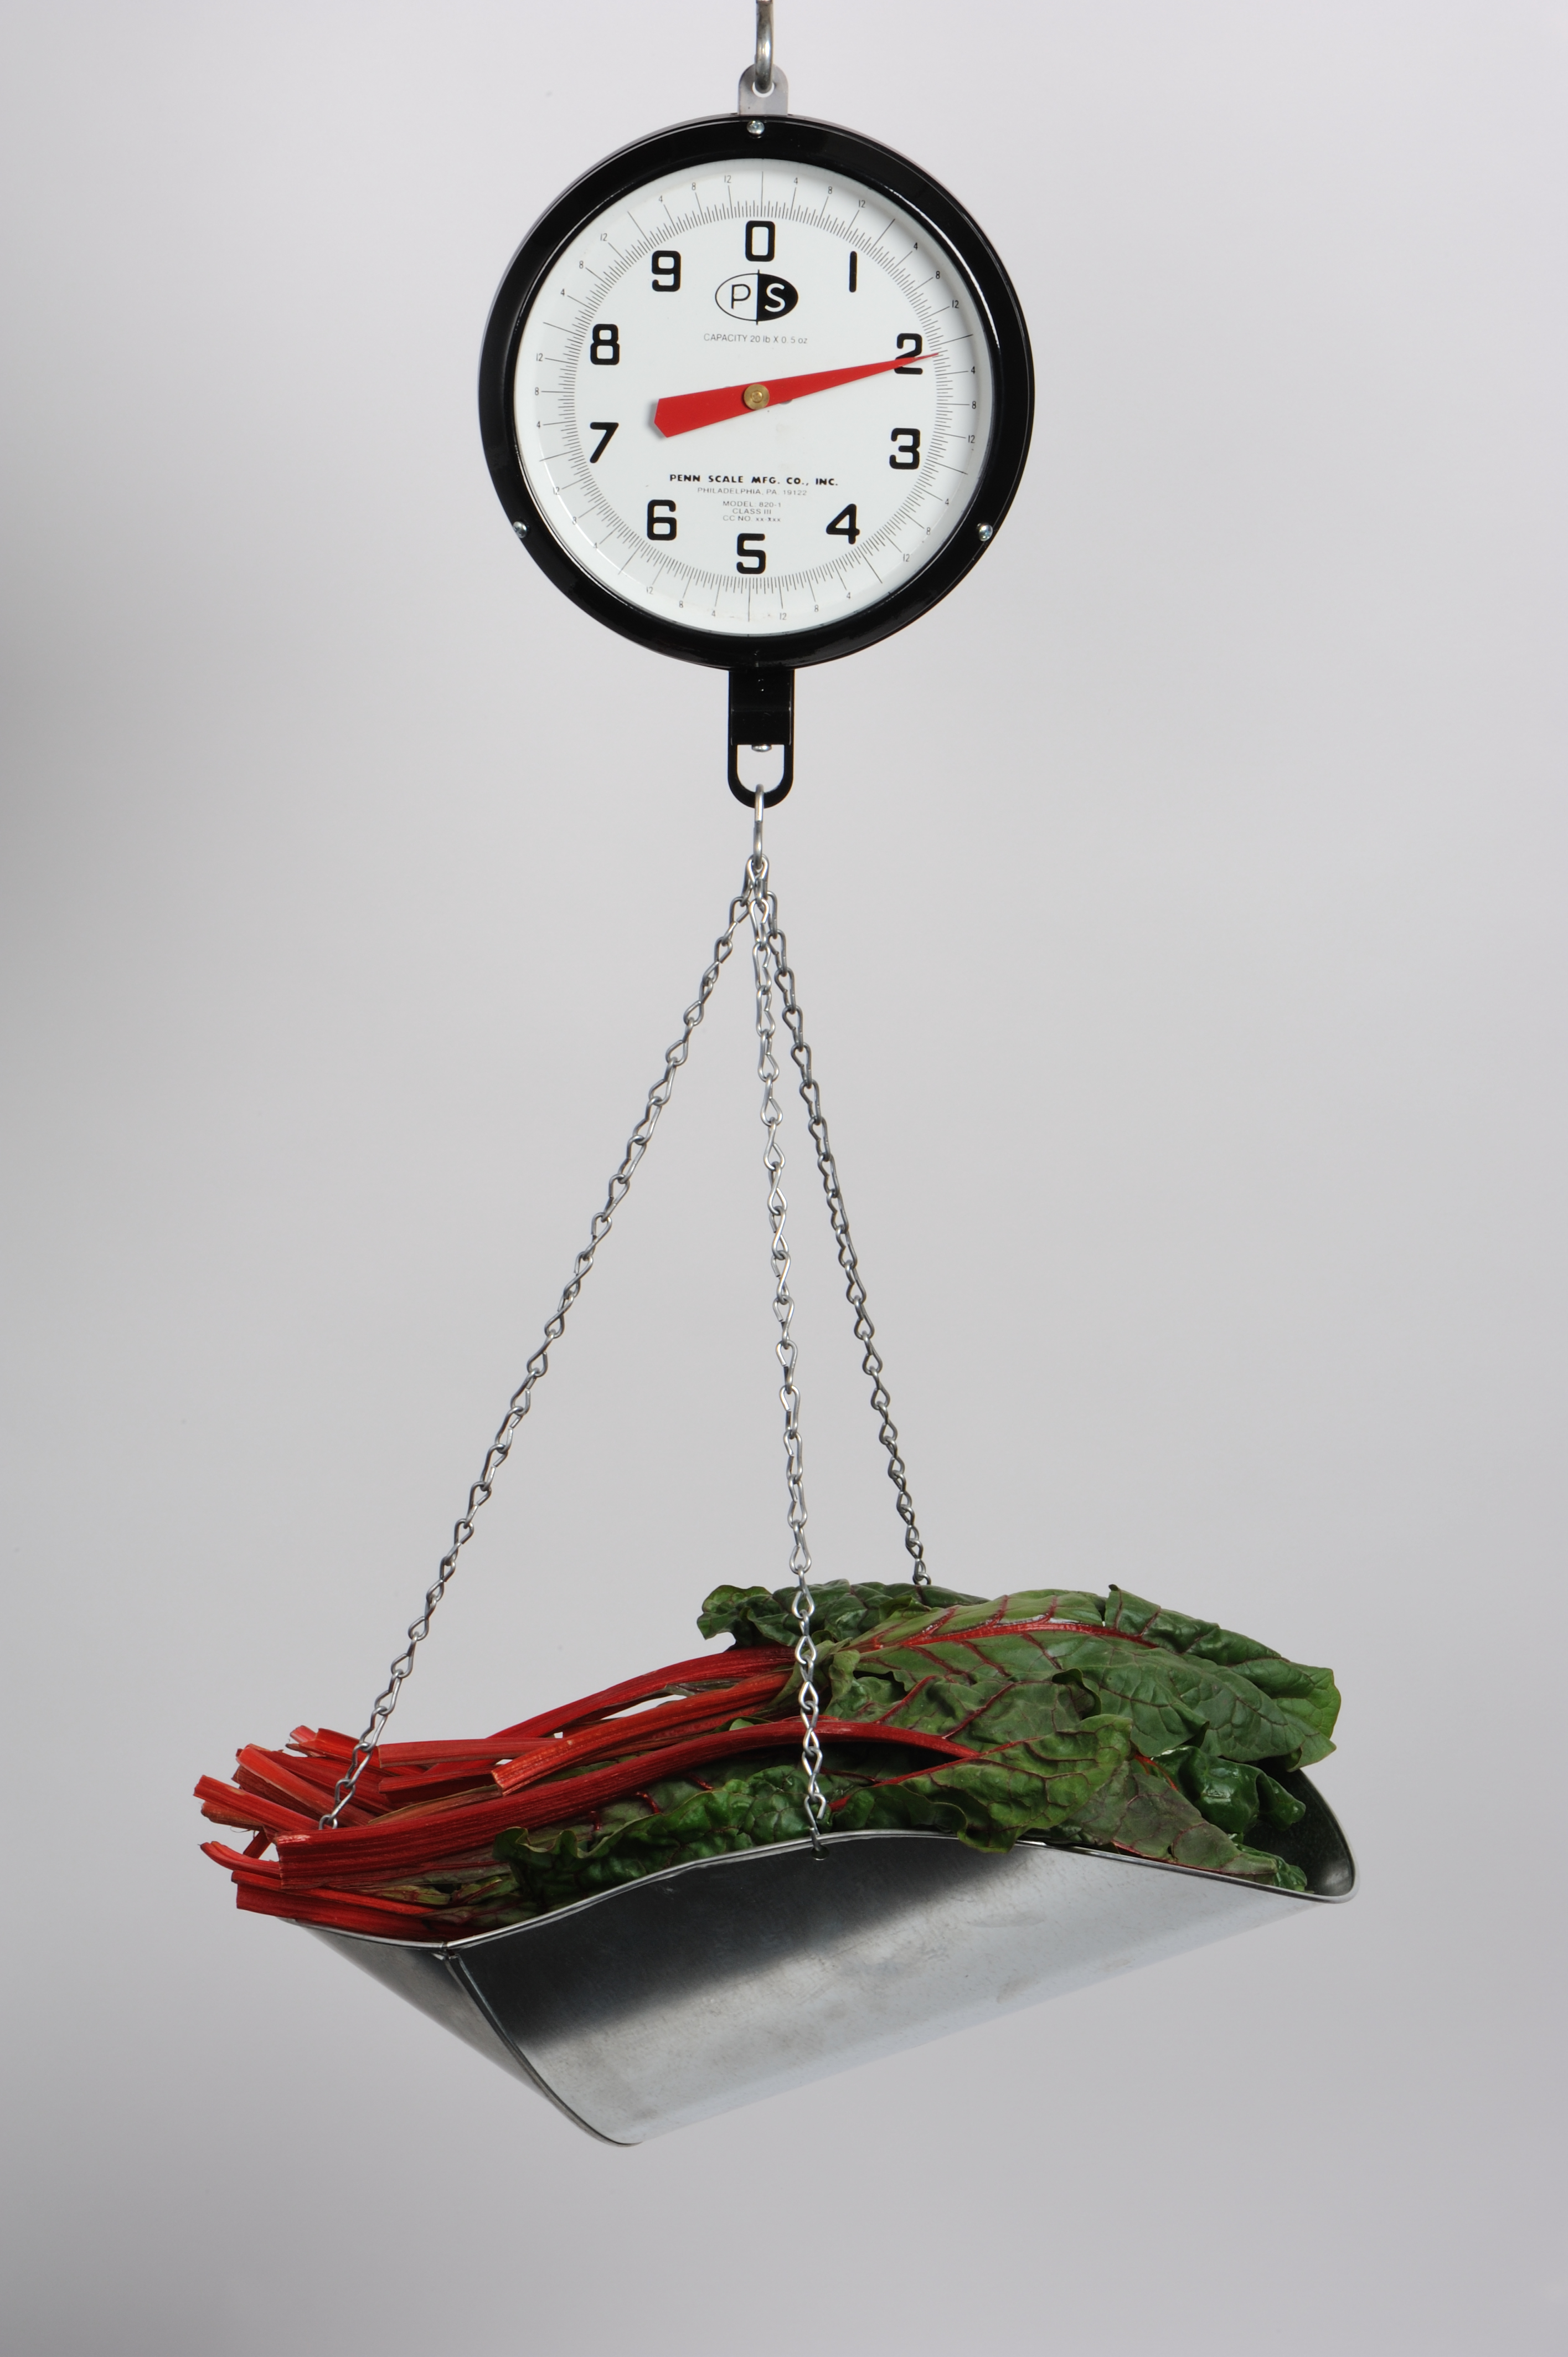 820 Vg 20 Pound 8 Inch Hanging Scale With Vegetable Scoop And Glass